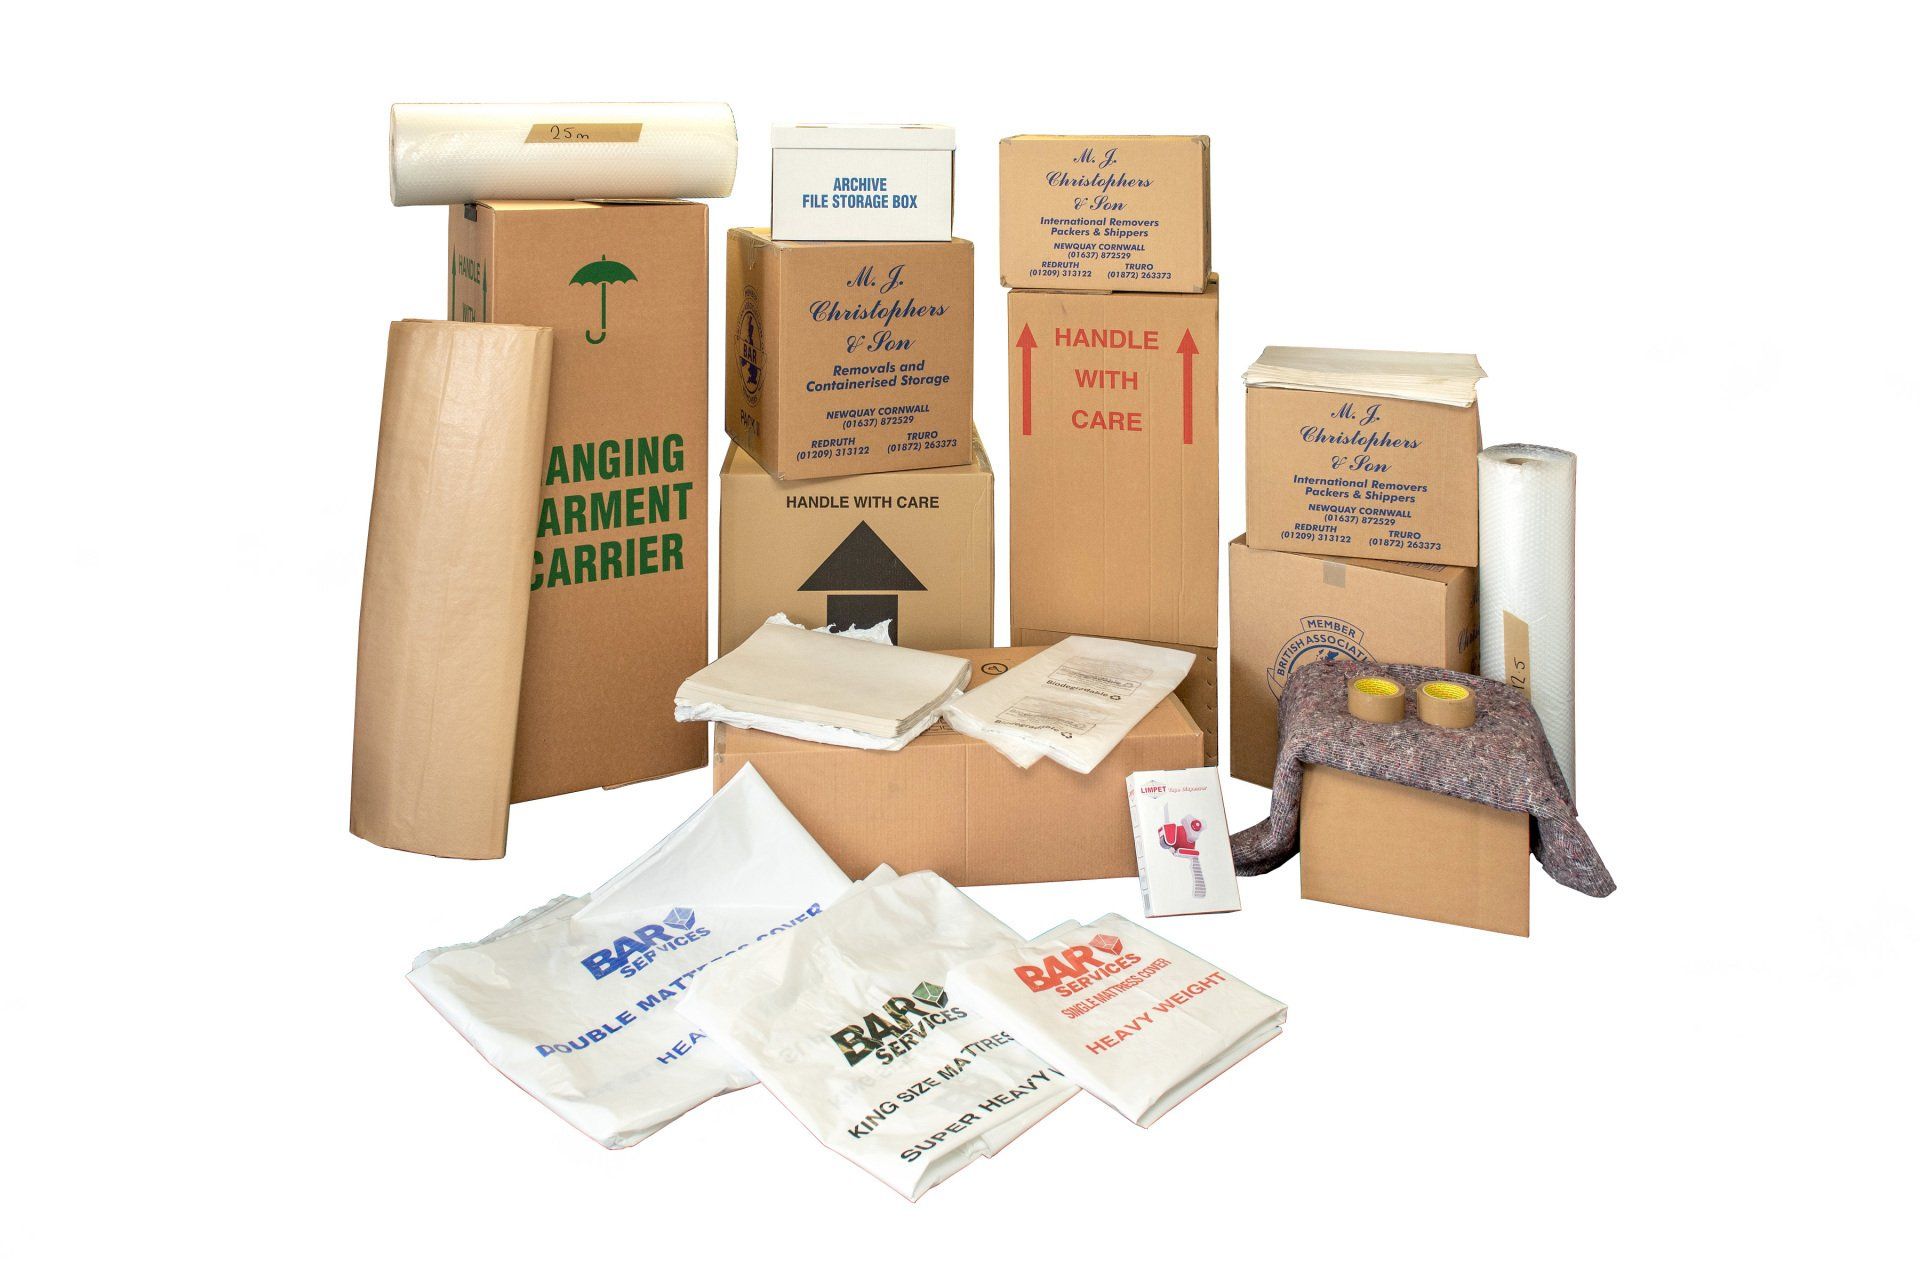 packing materials like bubble wraps and cardboard boxes offered